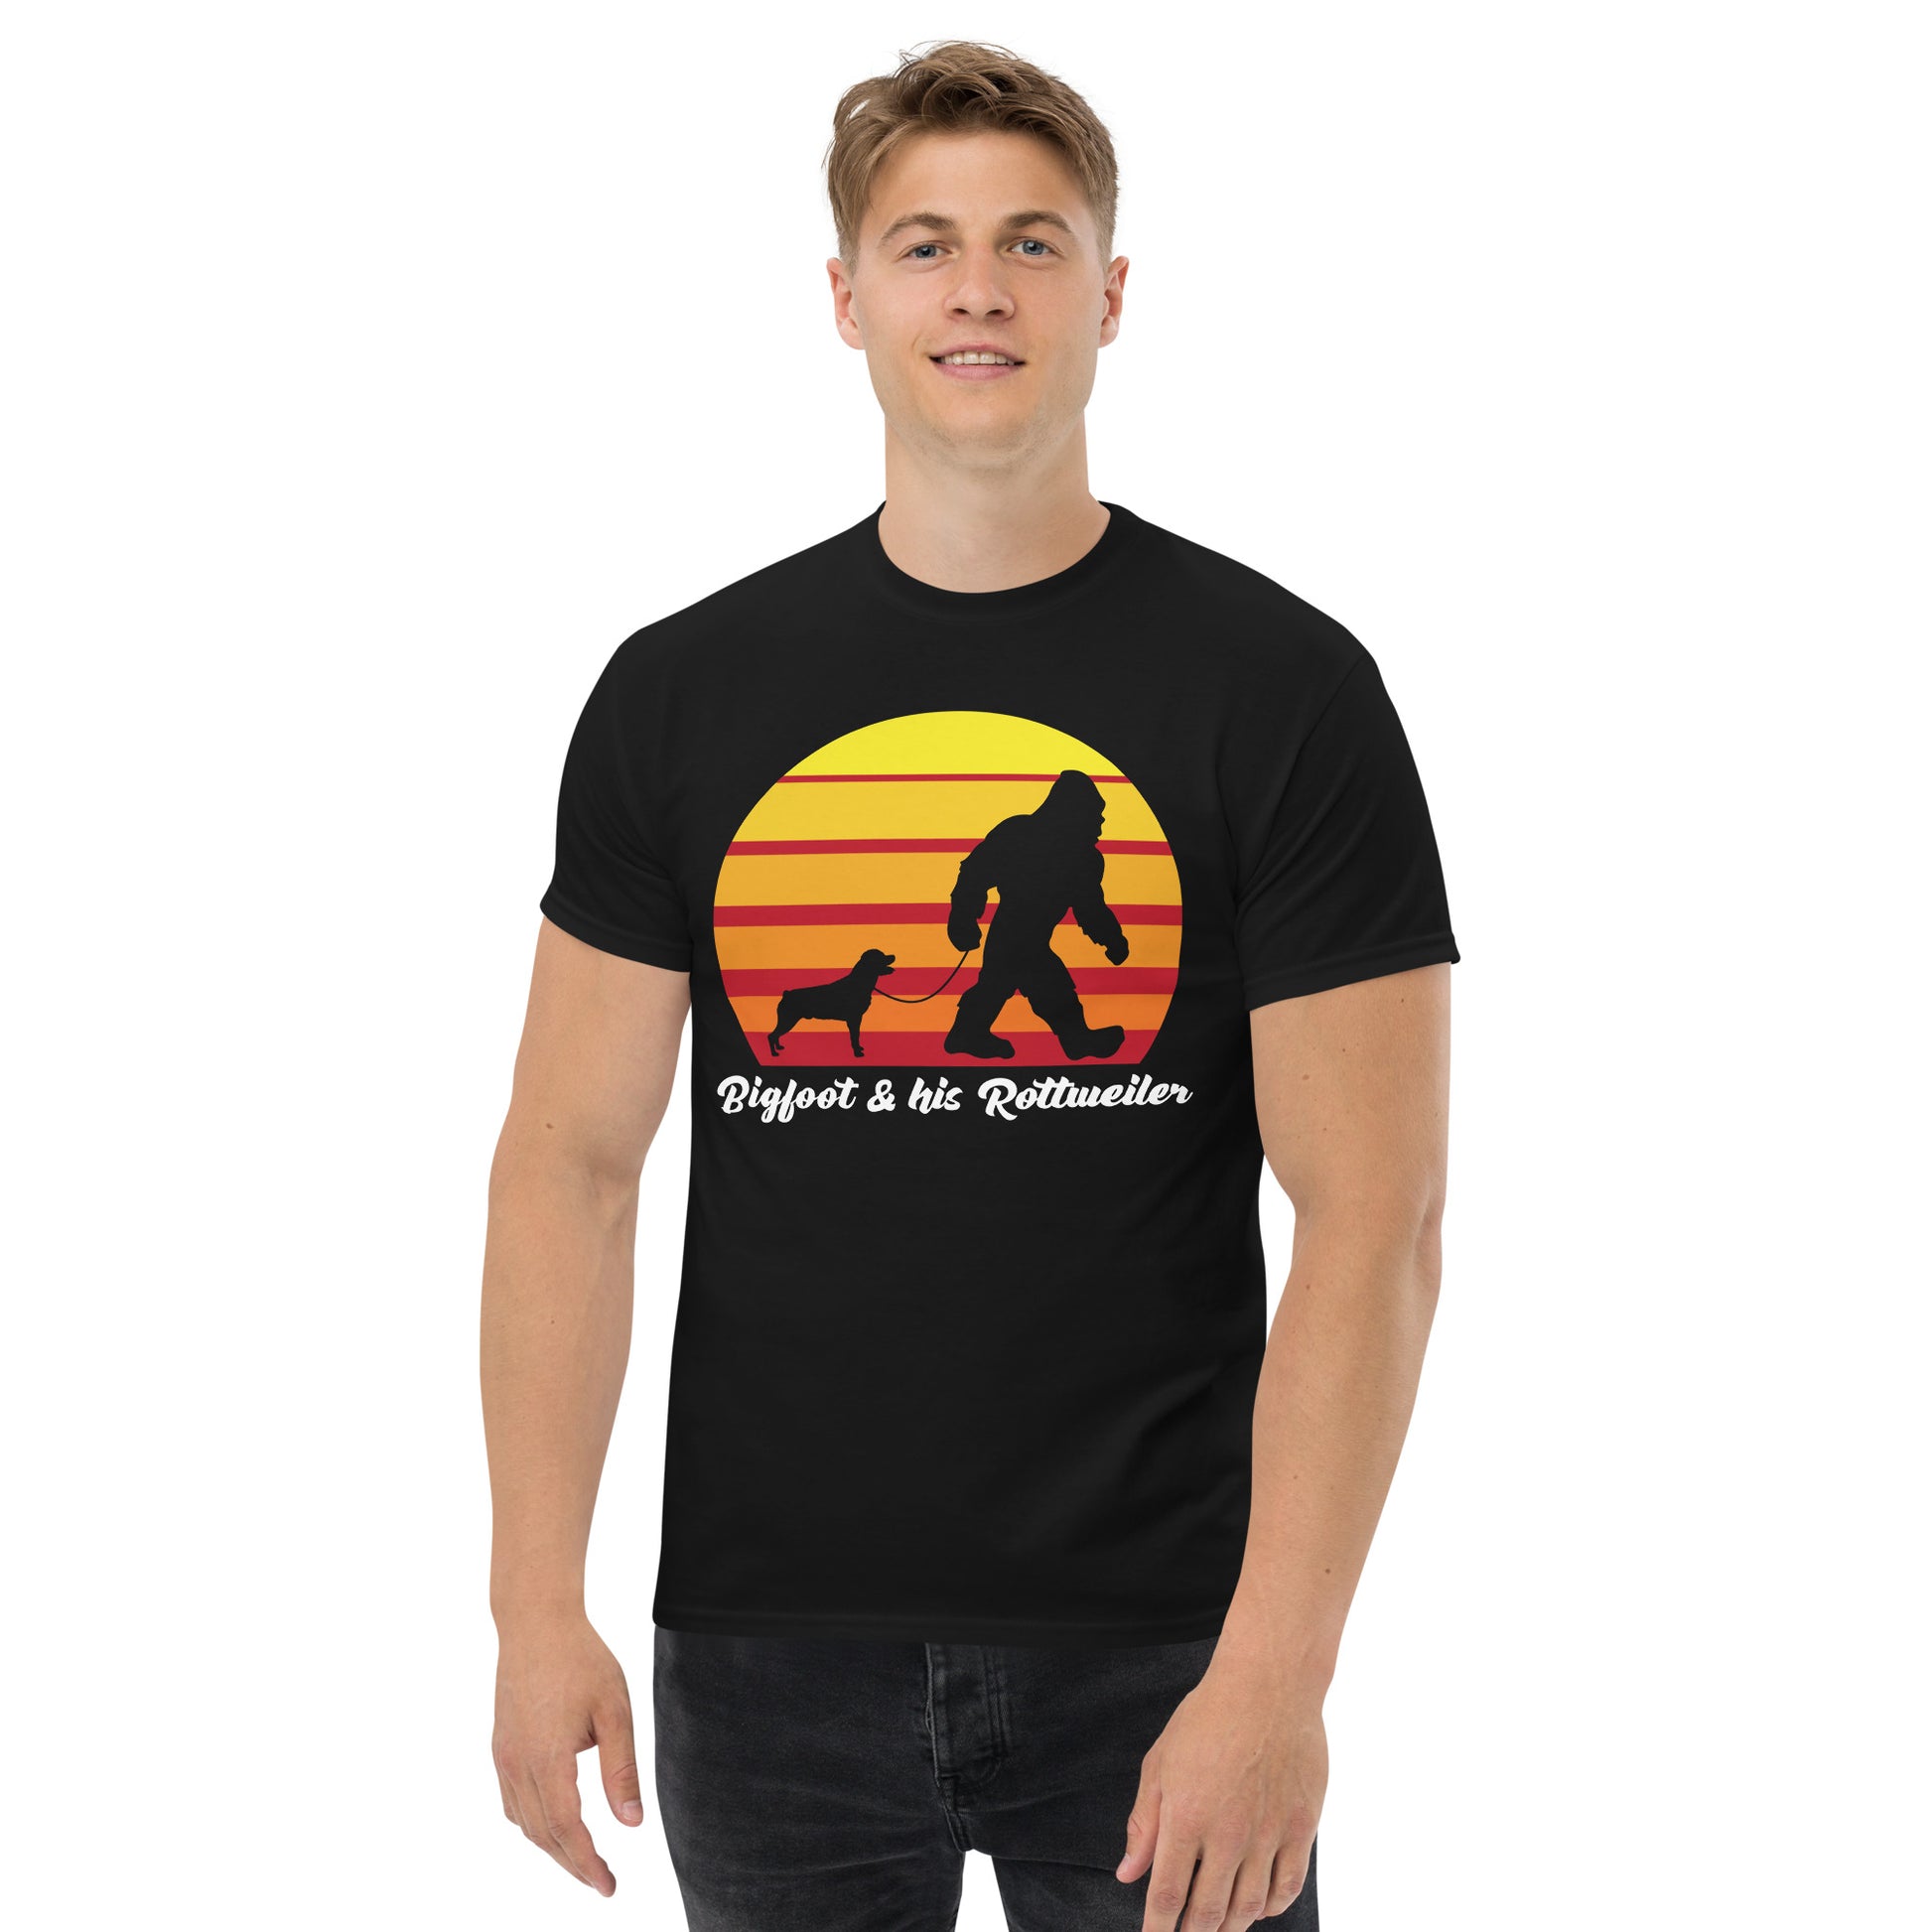 Bigfoot and his Rottweiler men’s black t-shirt by Dog Artistry.